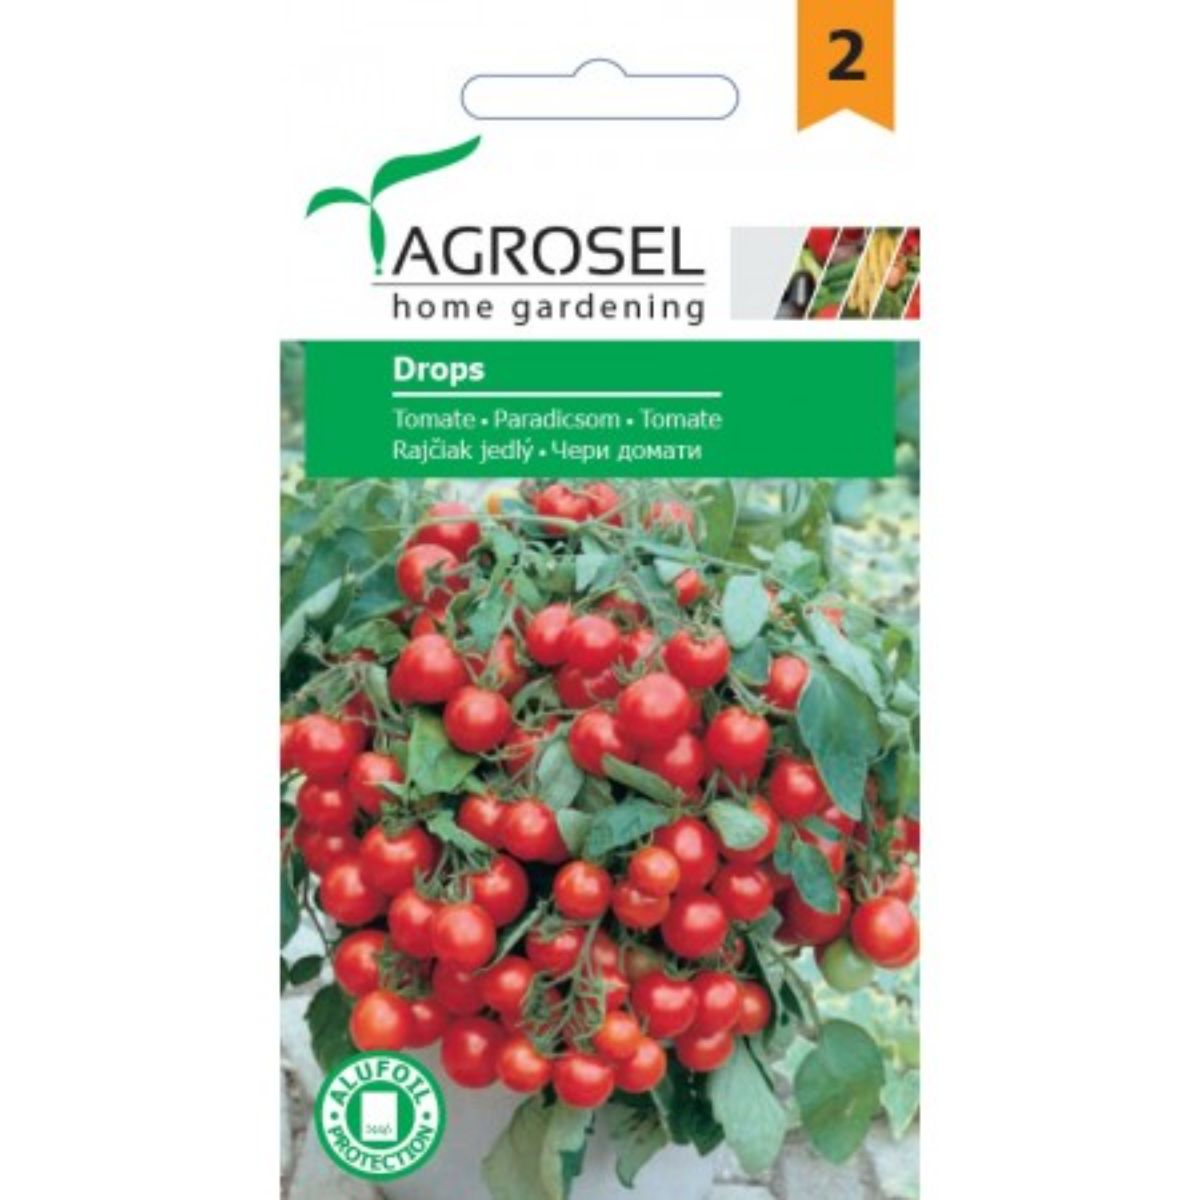 Tomate - Seminte Tomate Drops tip cherry (rosu rotund) Agrosel 0.6 g, hectarul.ro